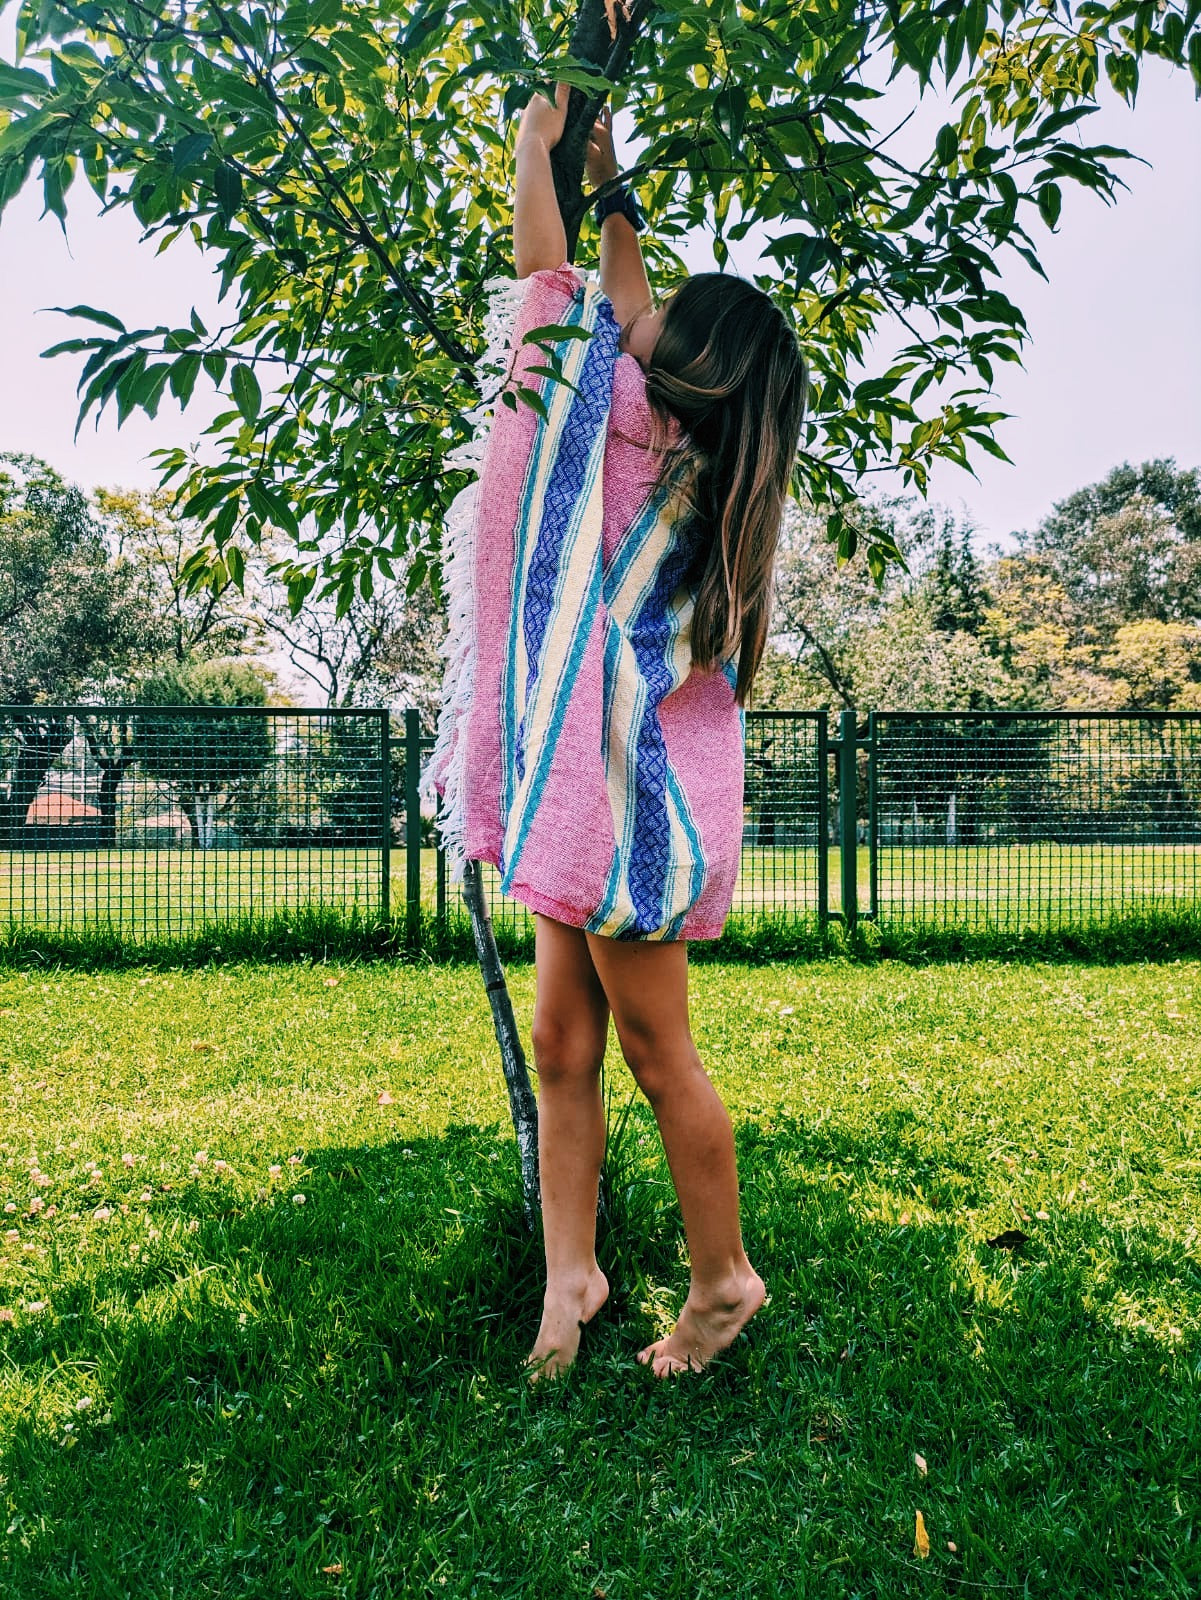 Mexican Kids Towel Dress for the Pool